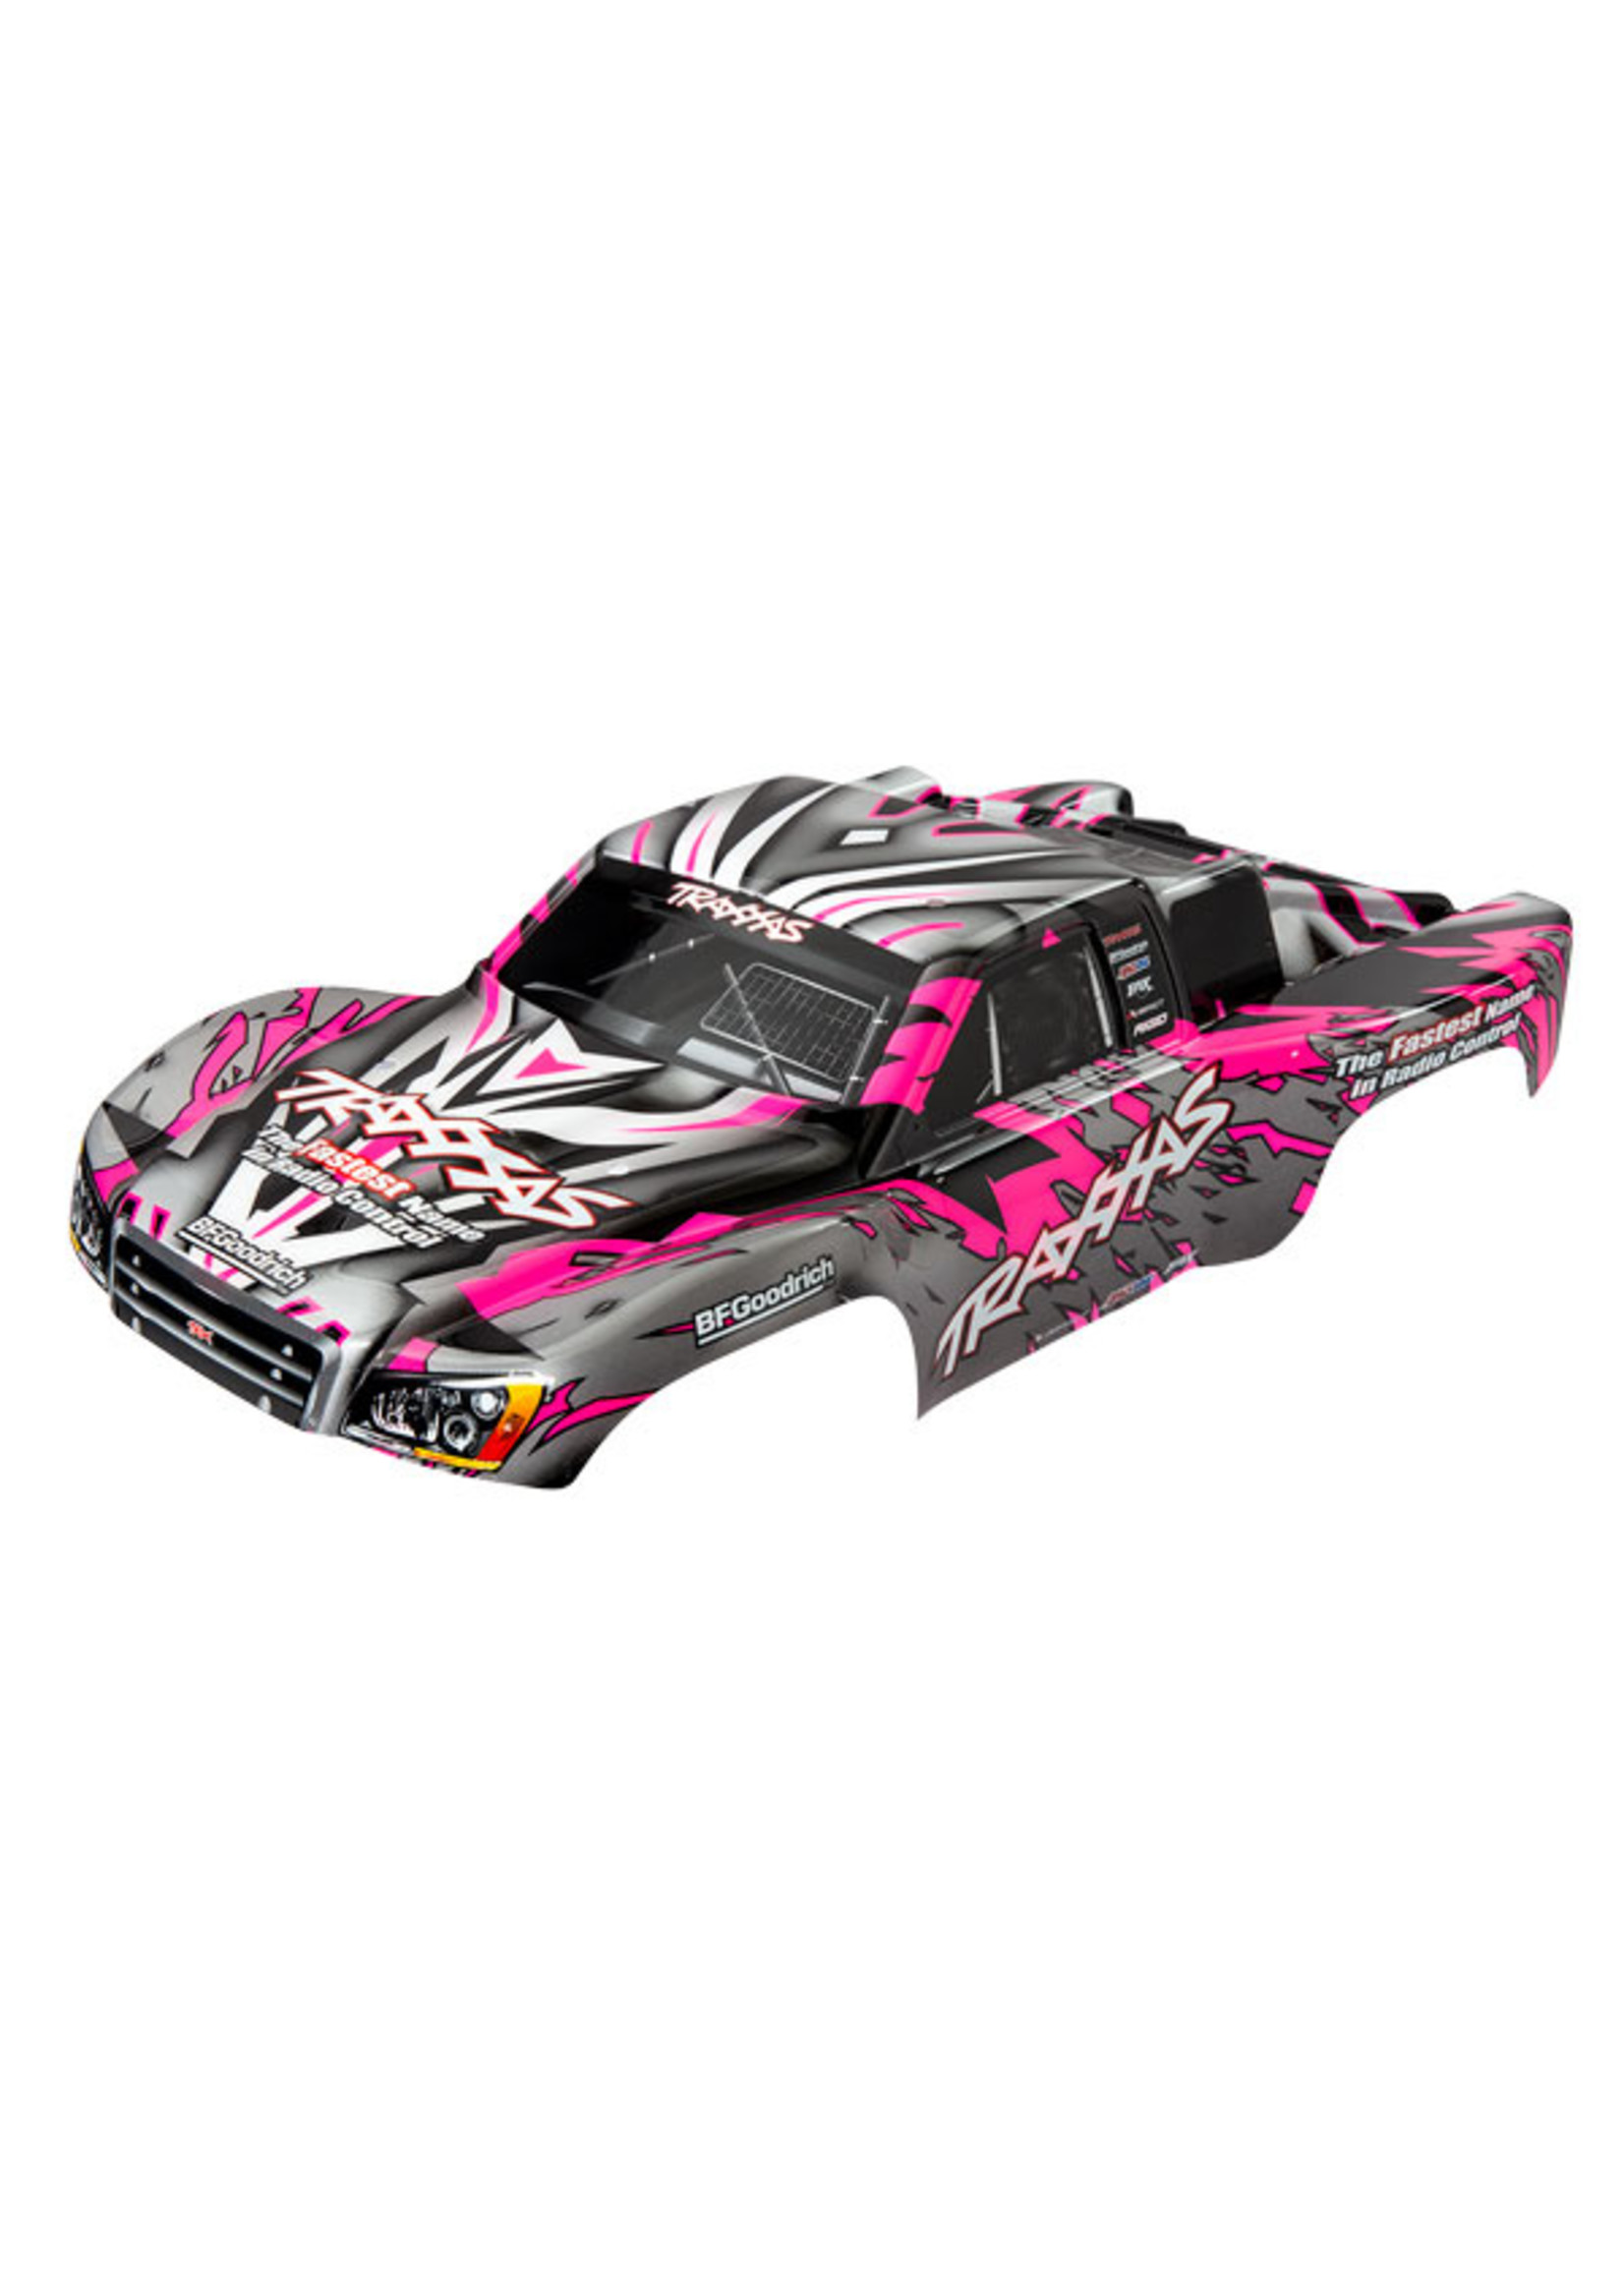 Traxxas 5847 - Painted Body for Slash 4x4 - Pink